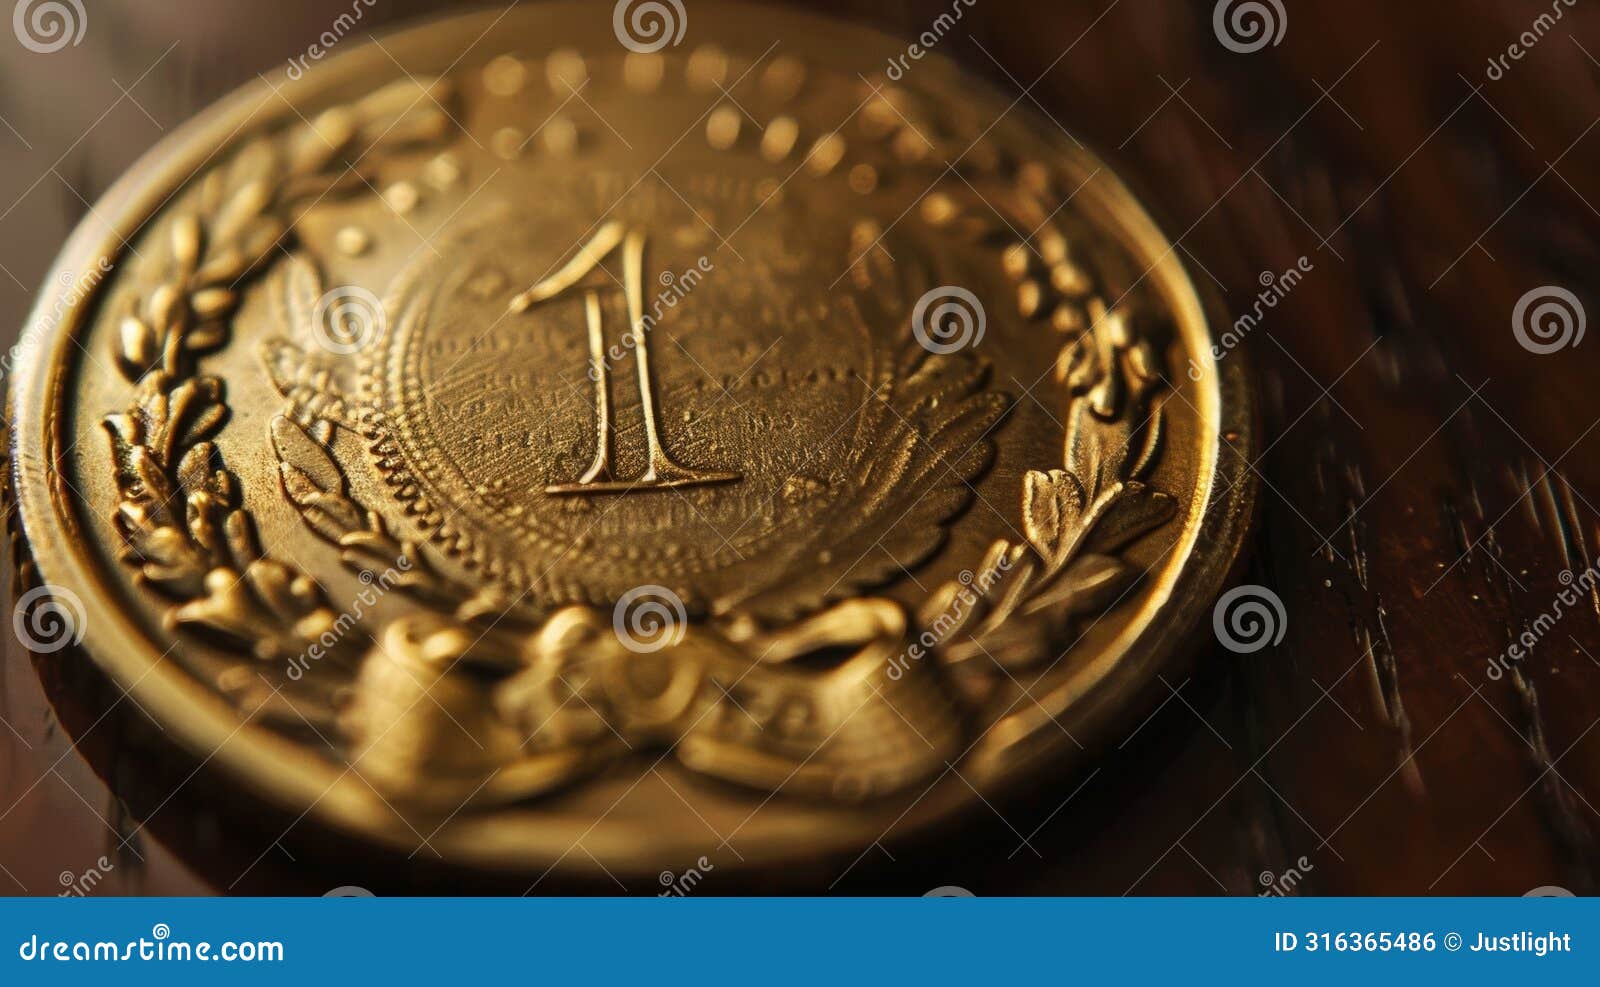 a closeup shot of a shiny gold medal with 1 year sober engraved on it